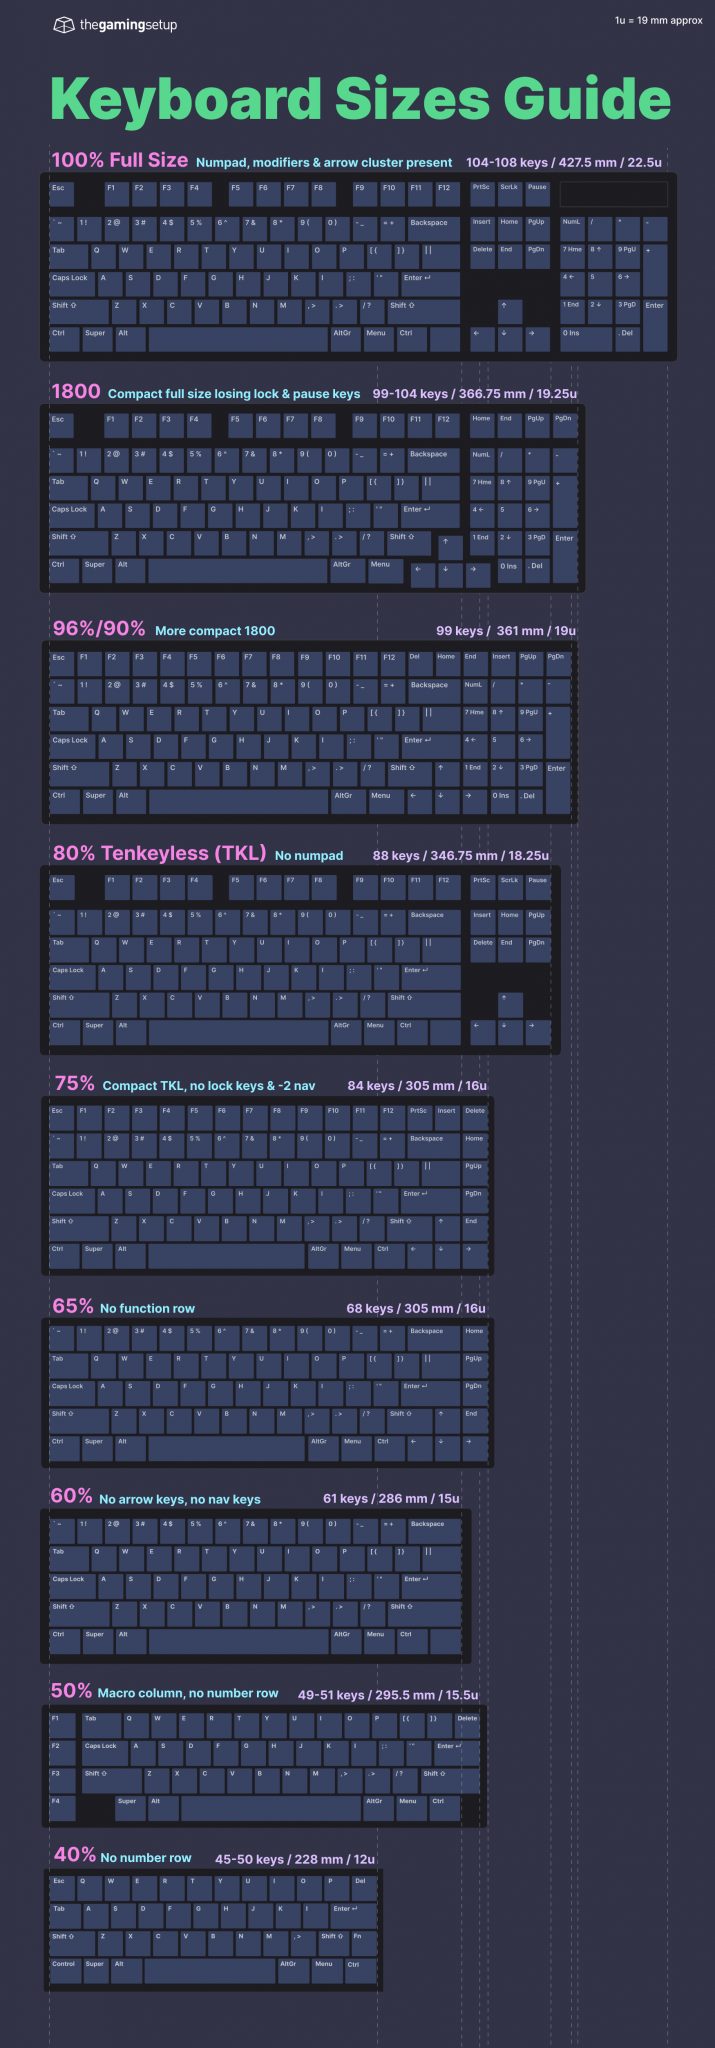 The Handy Guide To Keyboard Sizes & Layouts